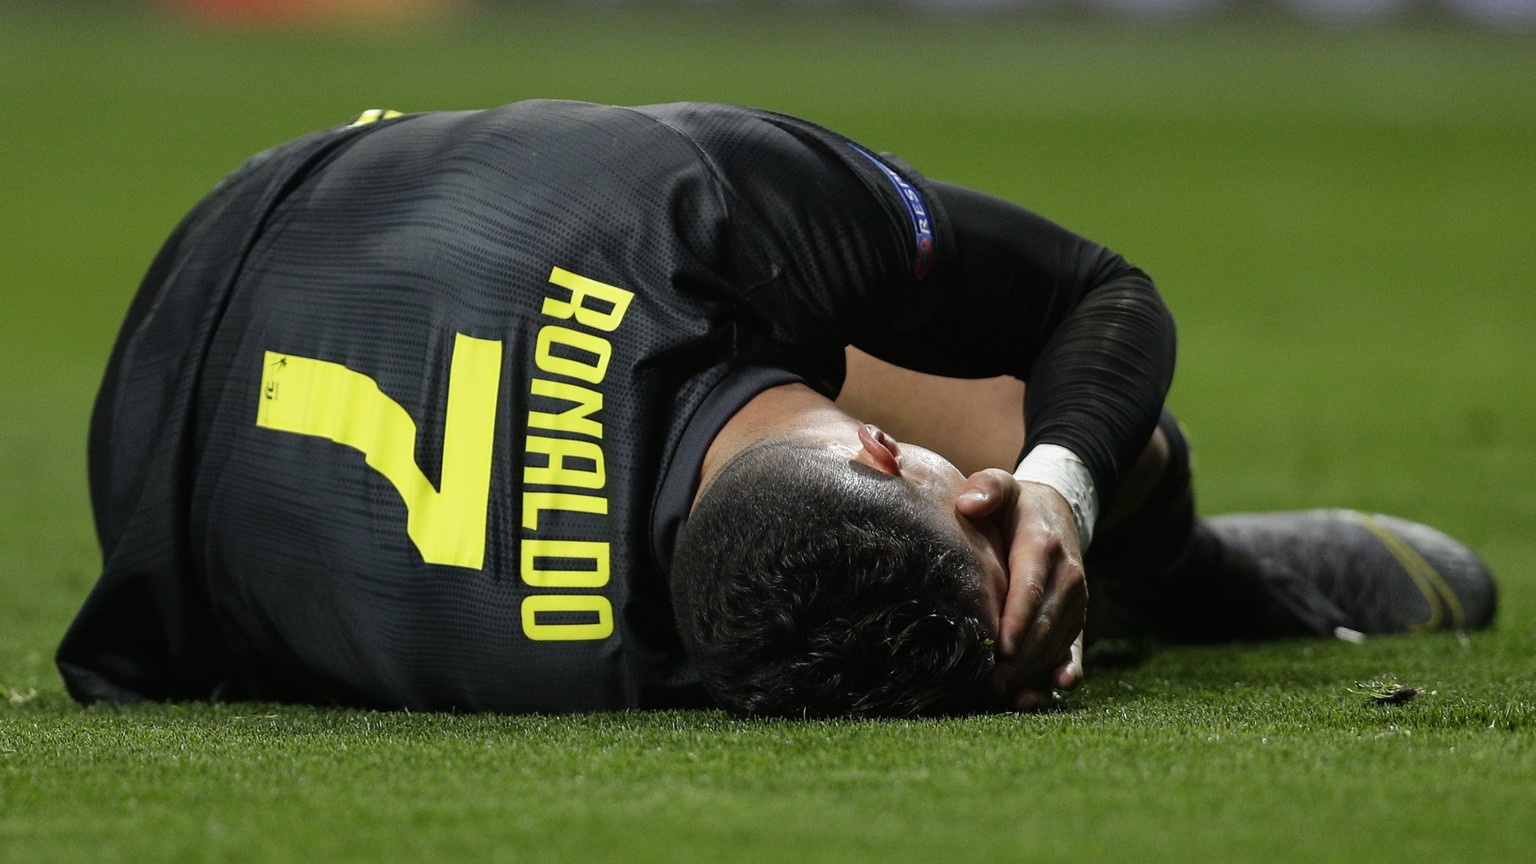 Juventus forward Cristiano Ronaldo lies on the ground during the Champions League round of 16 first leg soccer match between Atletico Madrid and Juventus at Wanda Metropolitano stadium in Madrid, Wedn ...